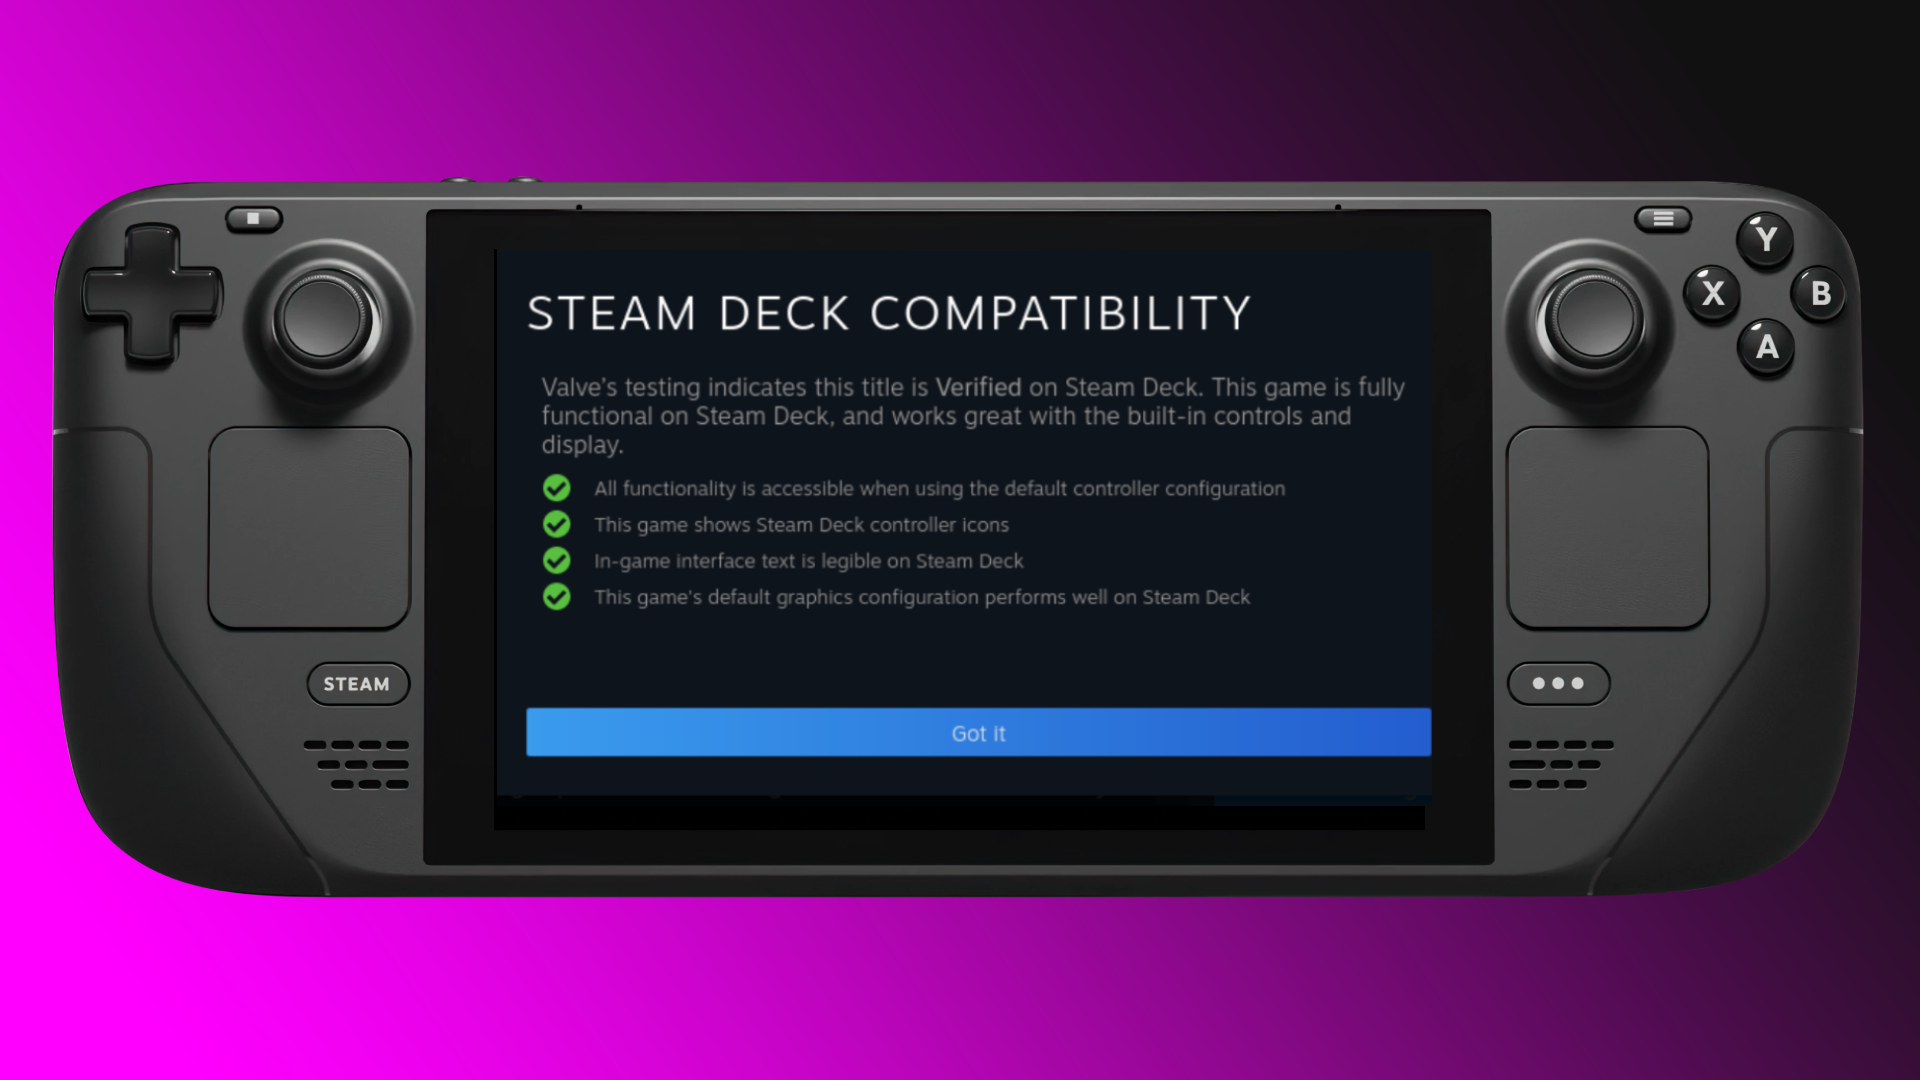 Steam Deck Officially Hits 10,000 Verified/Playable Games! - Steam Deck HQ